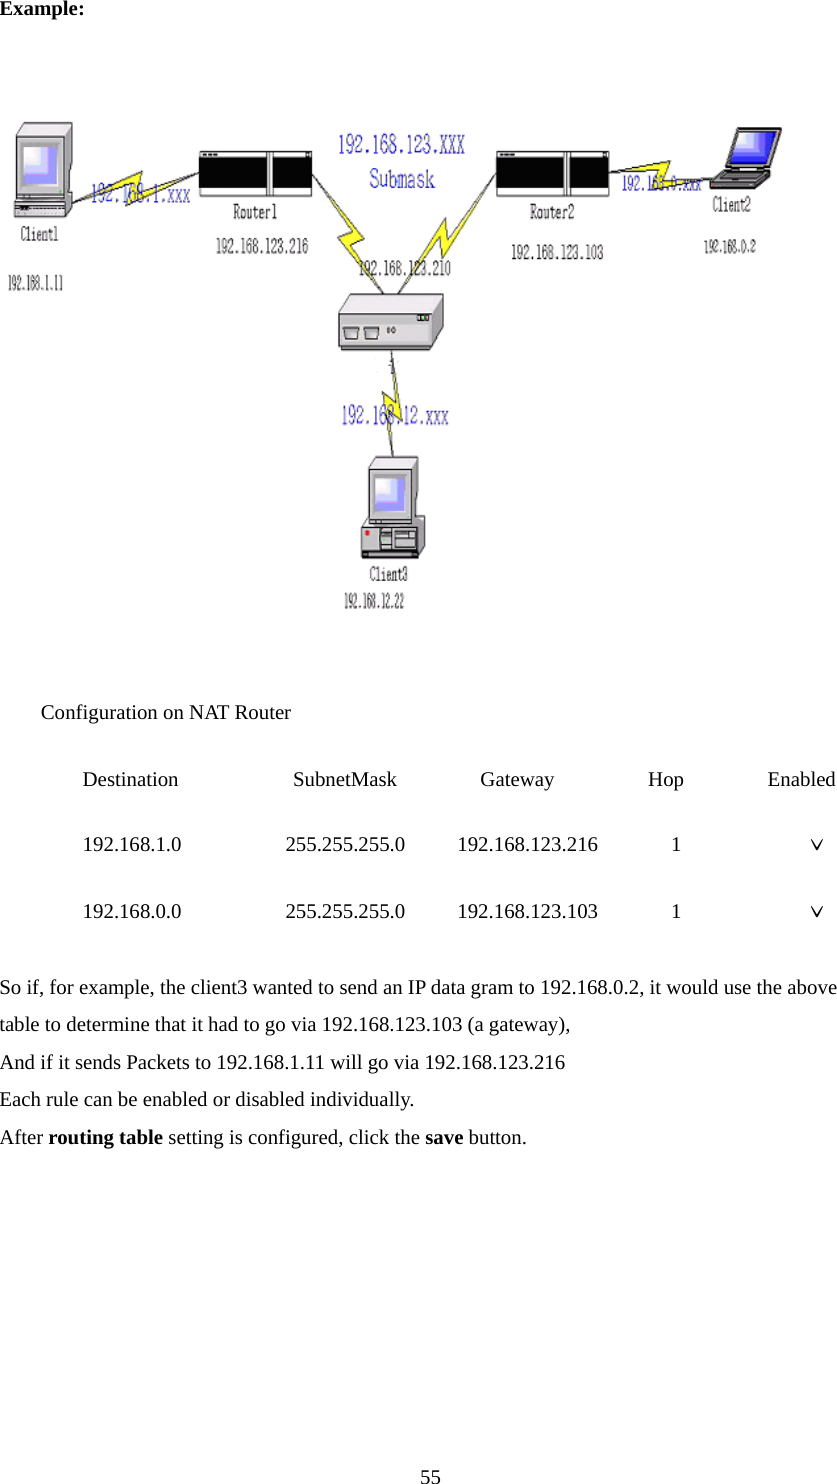 Example:    Configuration on NAT Router Destination           SubnetMask        Gateway         Hop        Enabled 192.168.1.0          255.255.255.0     192.168.123.216       1            ˇ 192.168.0.0          255.255.255.0     192.168.123.103       1            ˇ  So if, for example, the client3 wanted to send an IP data gram to 192.168.0.2, it would use the above table to determine that it had to go via 192.168.123.103 (a gateway),   And if it sends Packets to 192.168.1.11 will go via 192.168.123.216 Each rule can be enabled or disabled individually. After routing table setting is configured, click the save button.  55